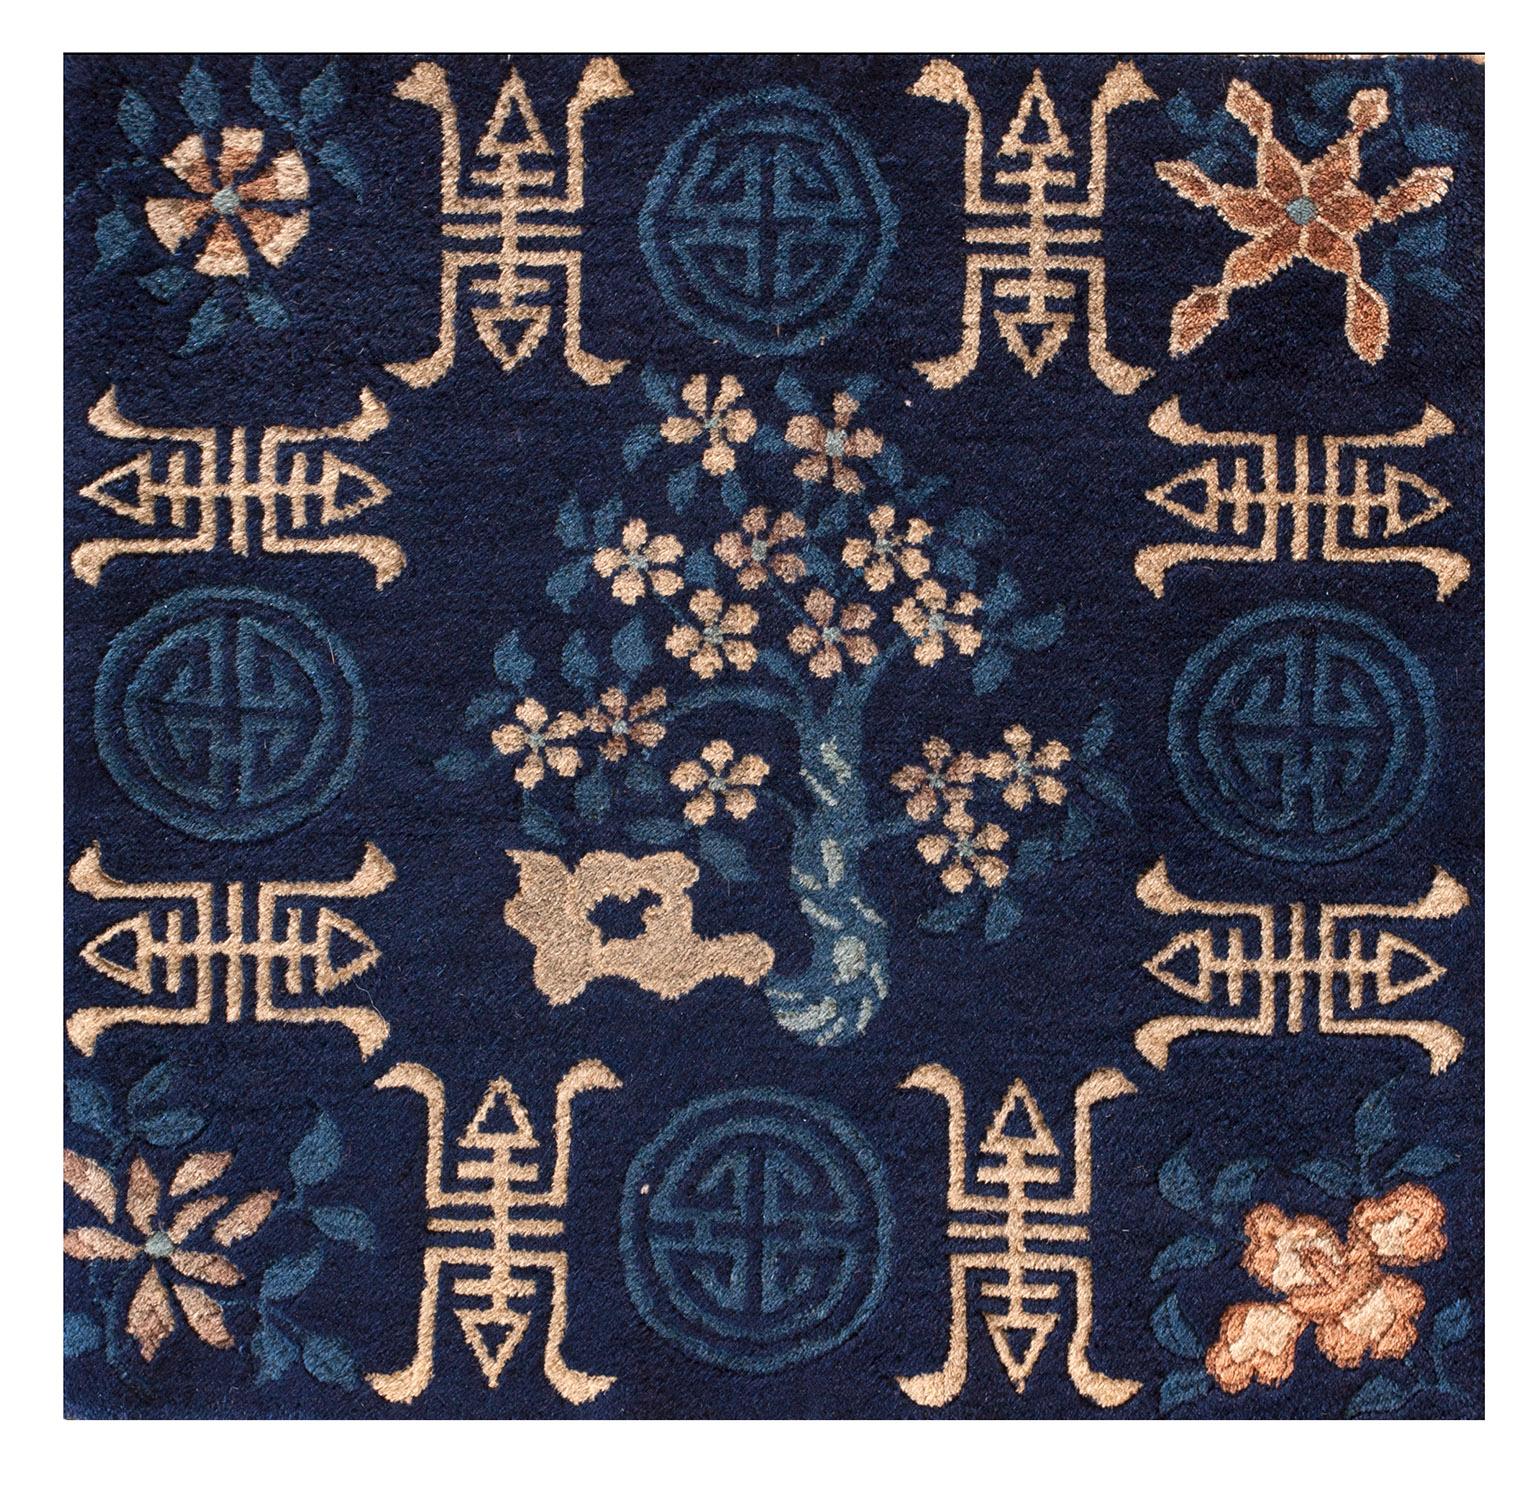 Early 20th Century Late 19th Century Chinese Peking Carpet ( 2' x 2' - 62 x 62 ) For Sale